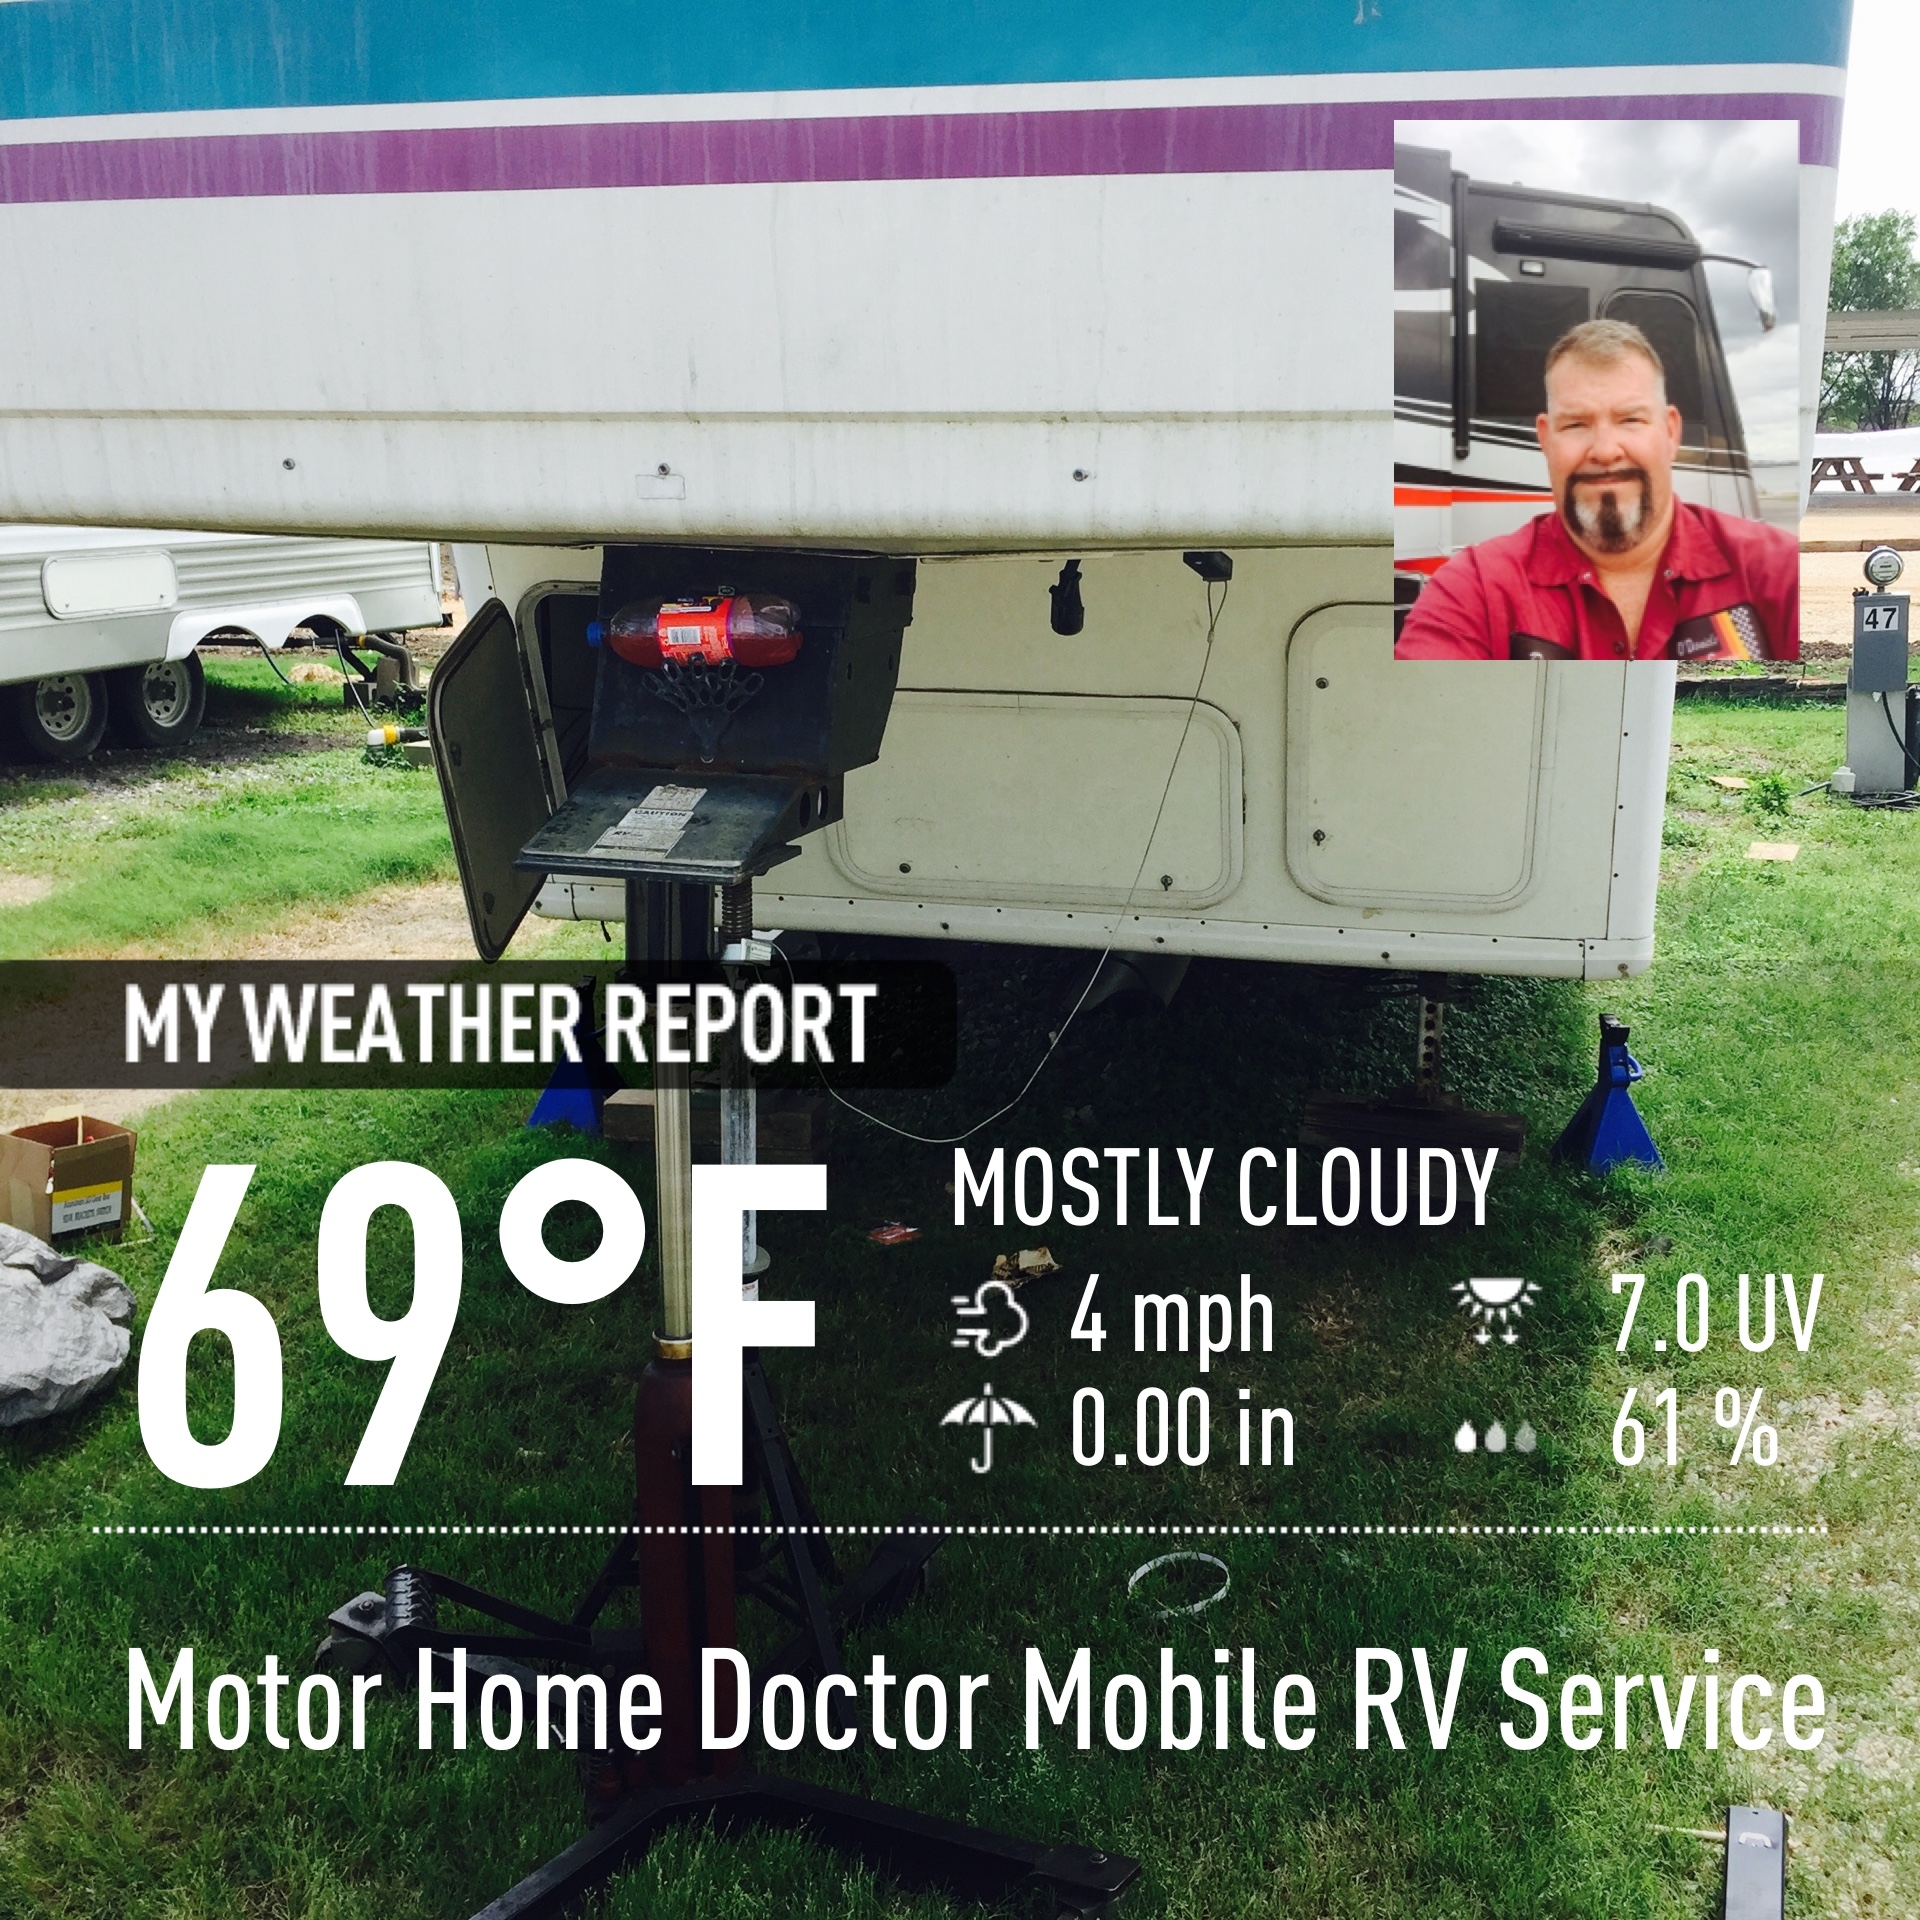 Motor Home Doctor Mobile RV Service Coupons near me in ...